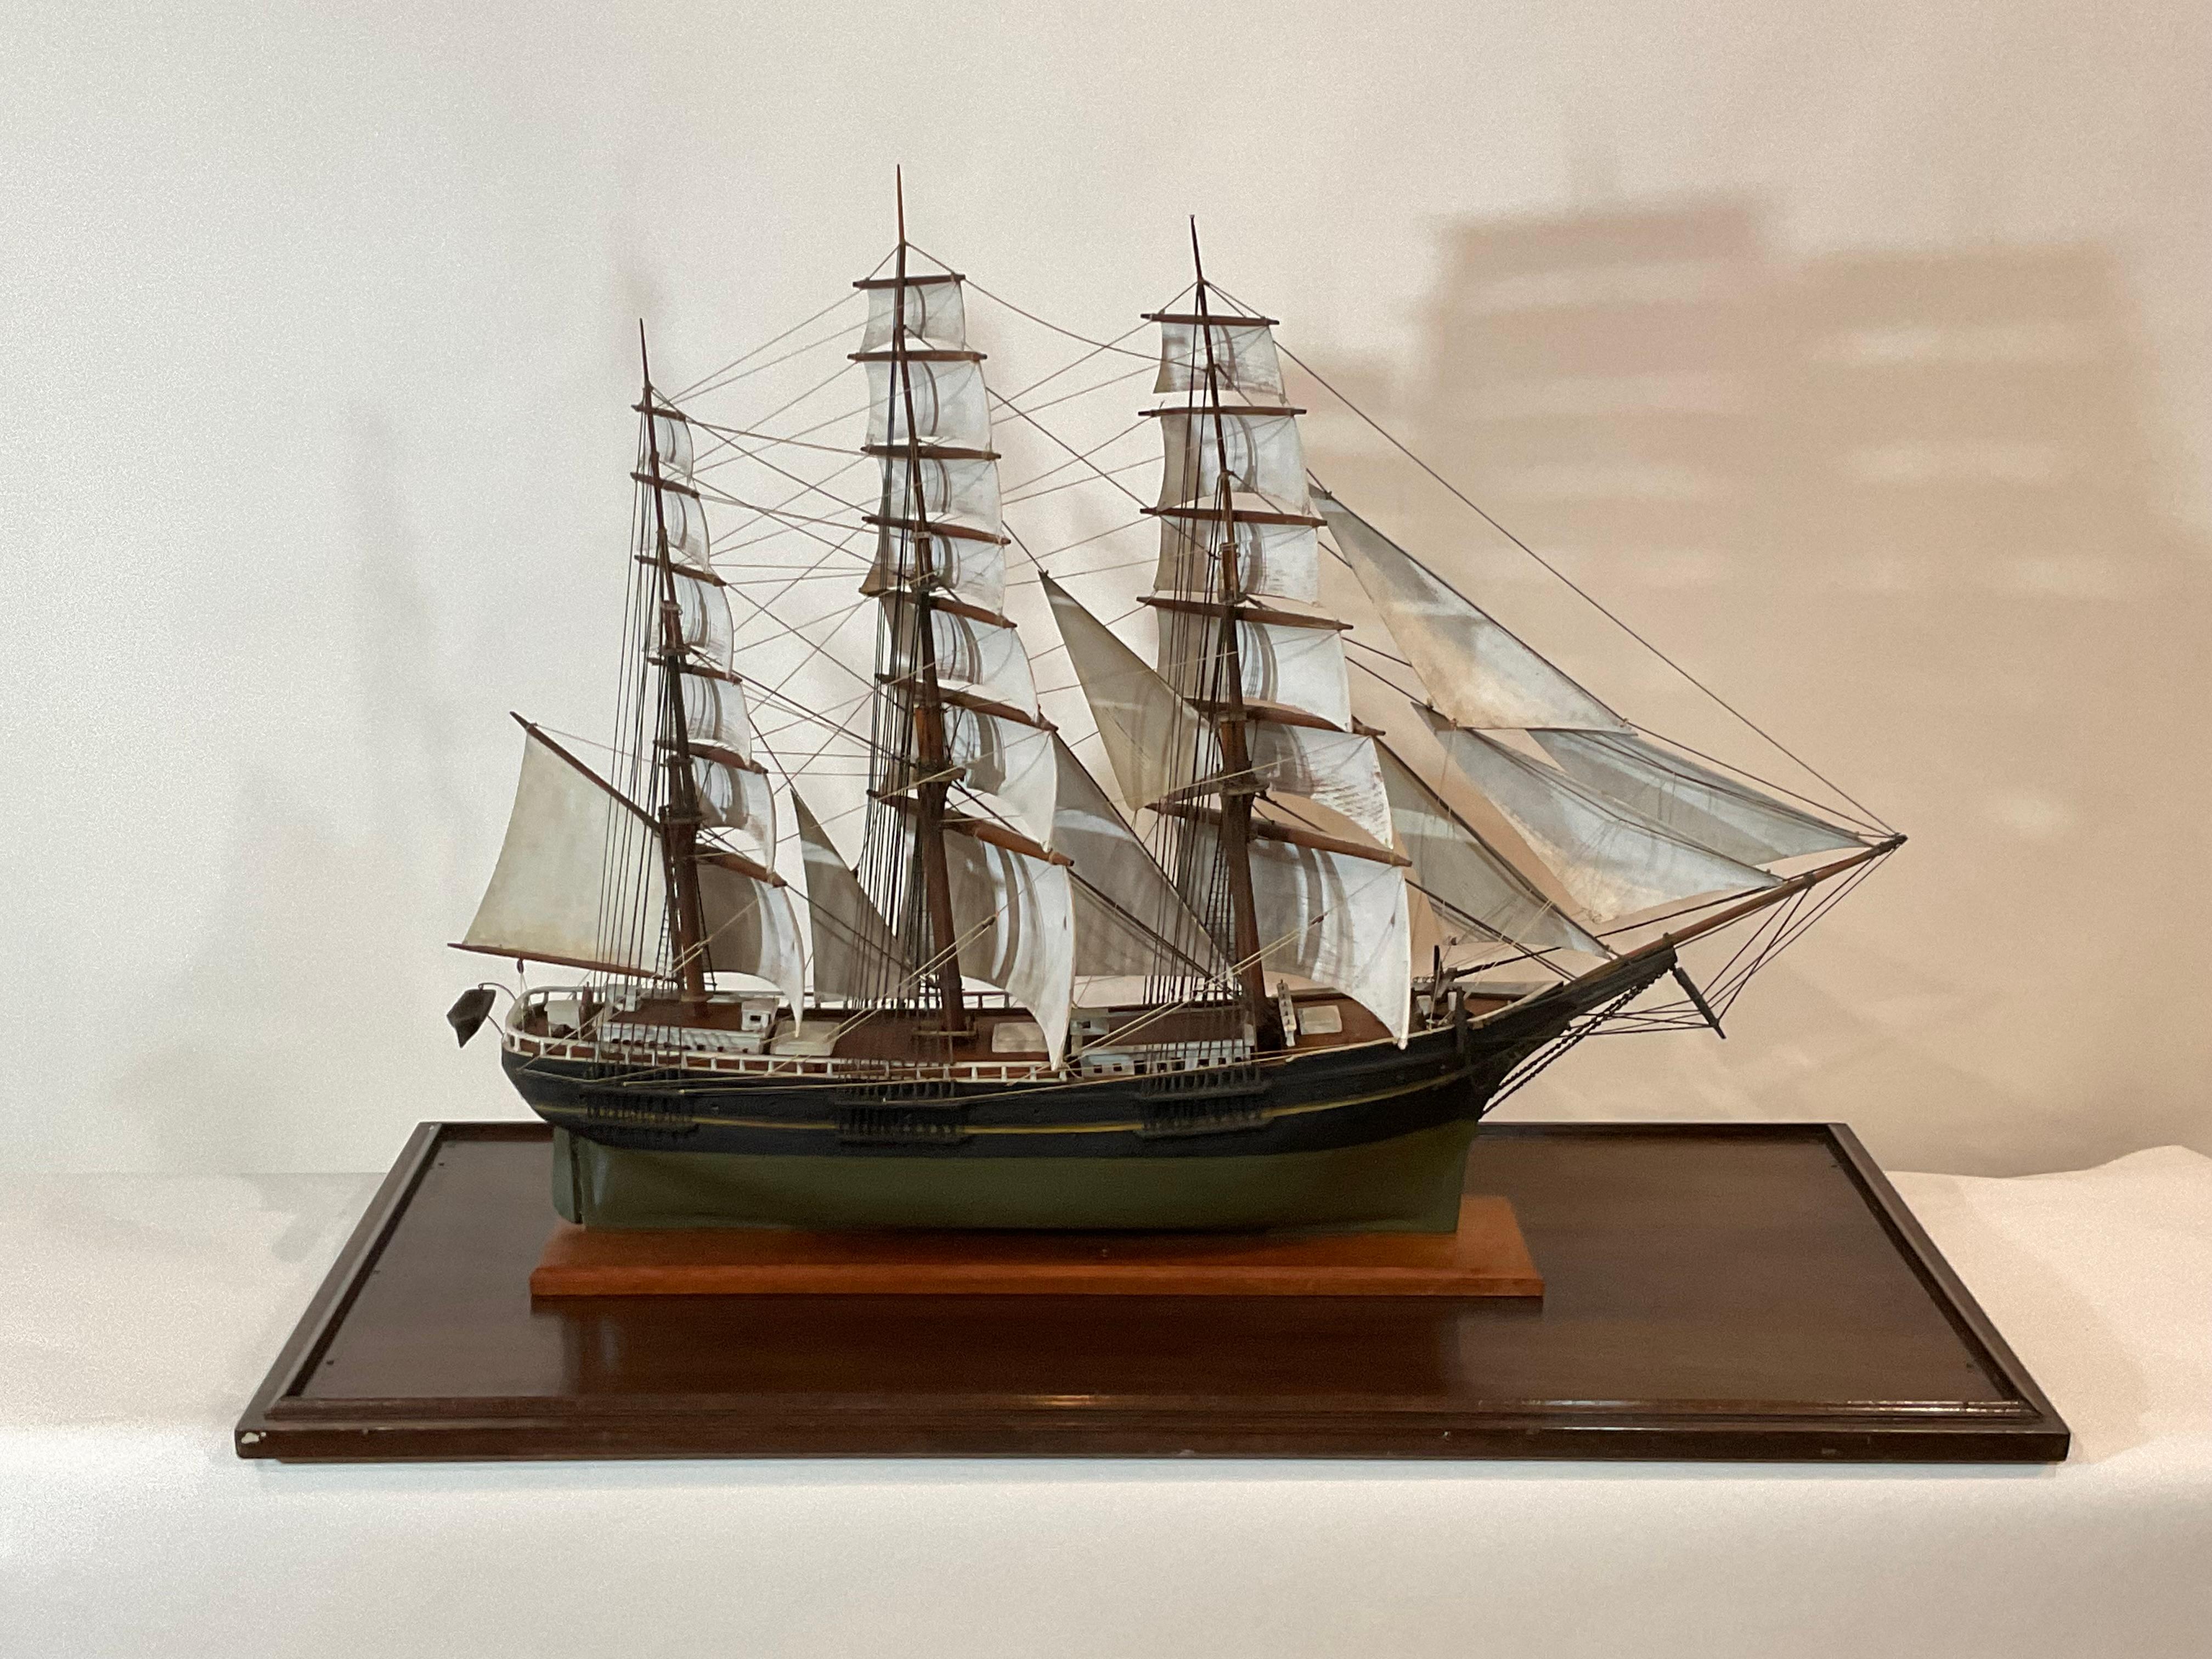 North American Antique Model of a Full Rigged Windjammer For Sale